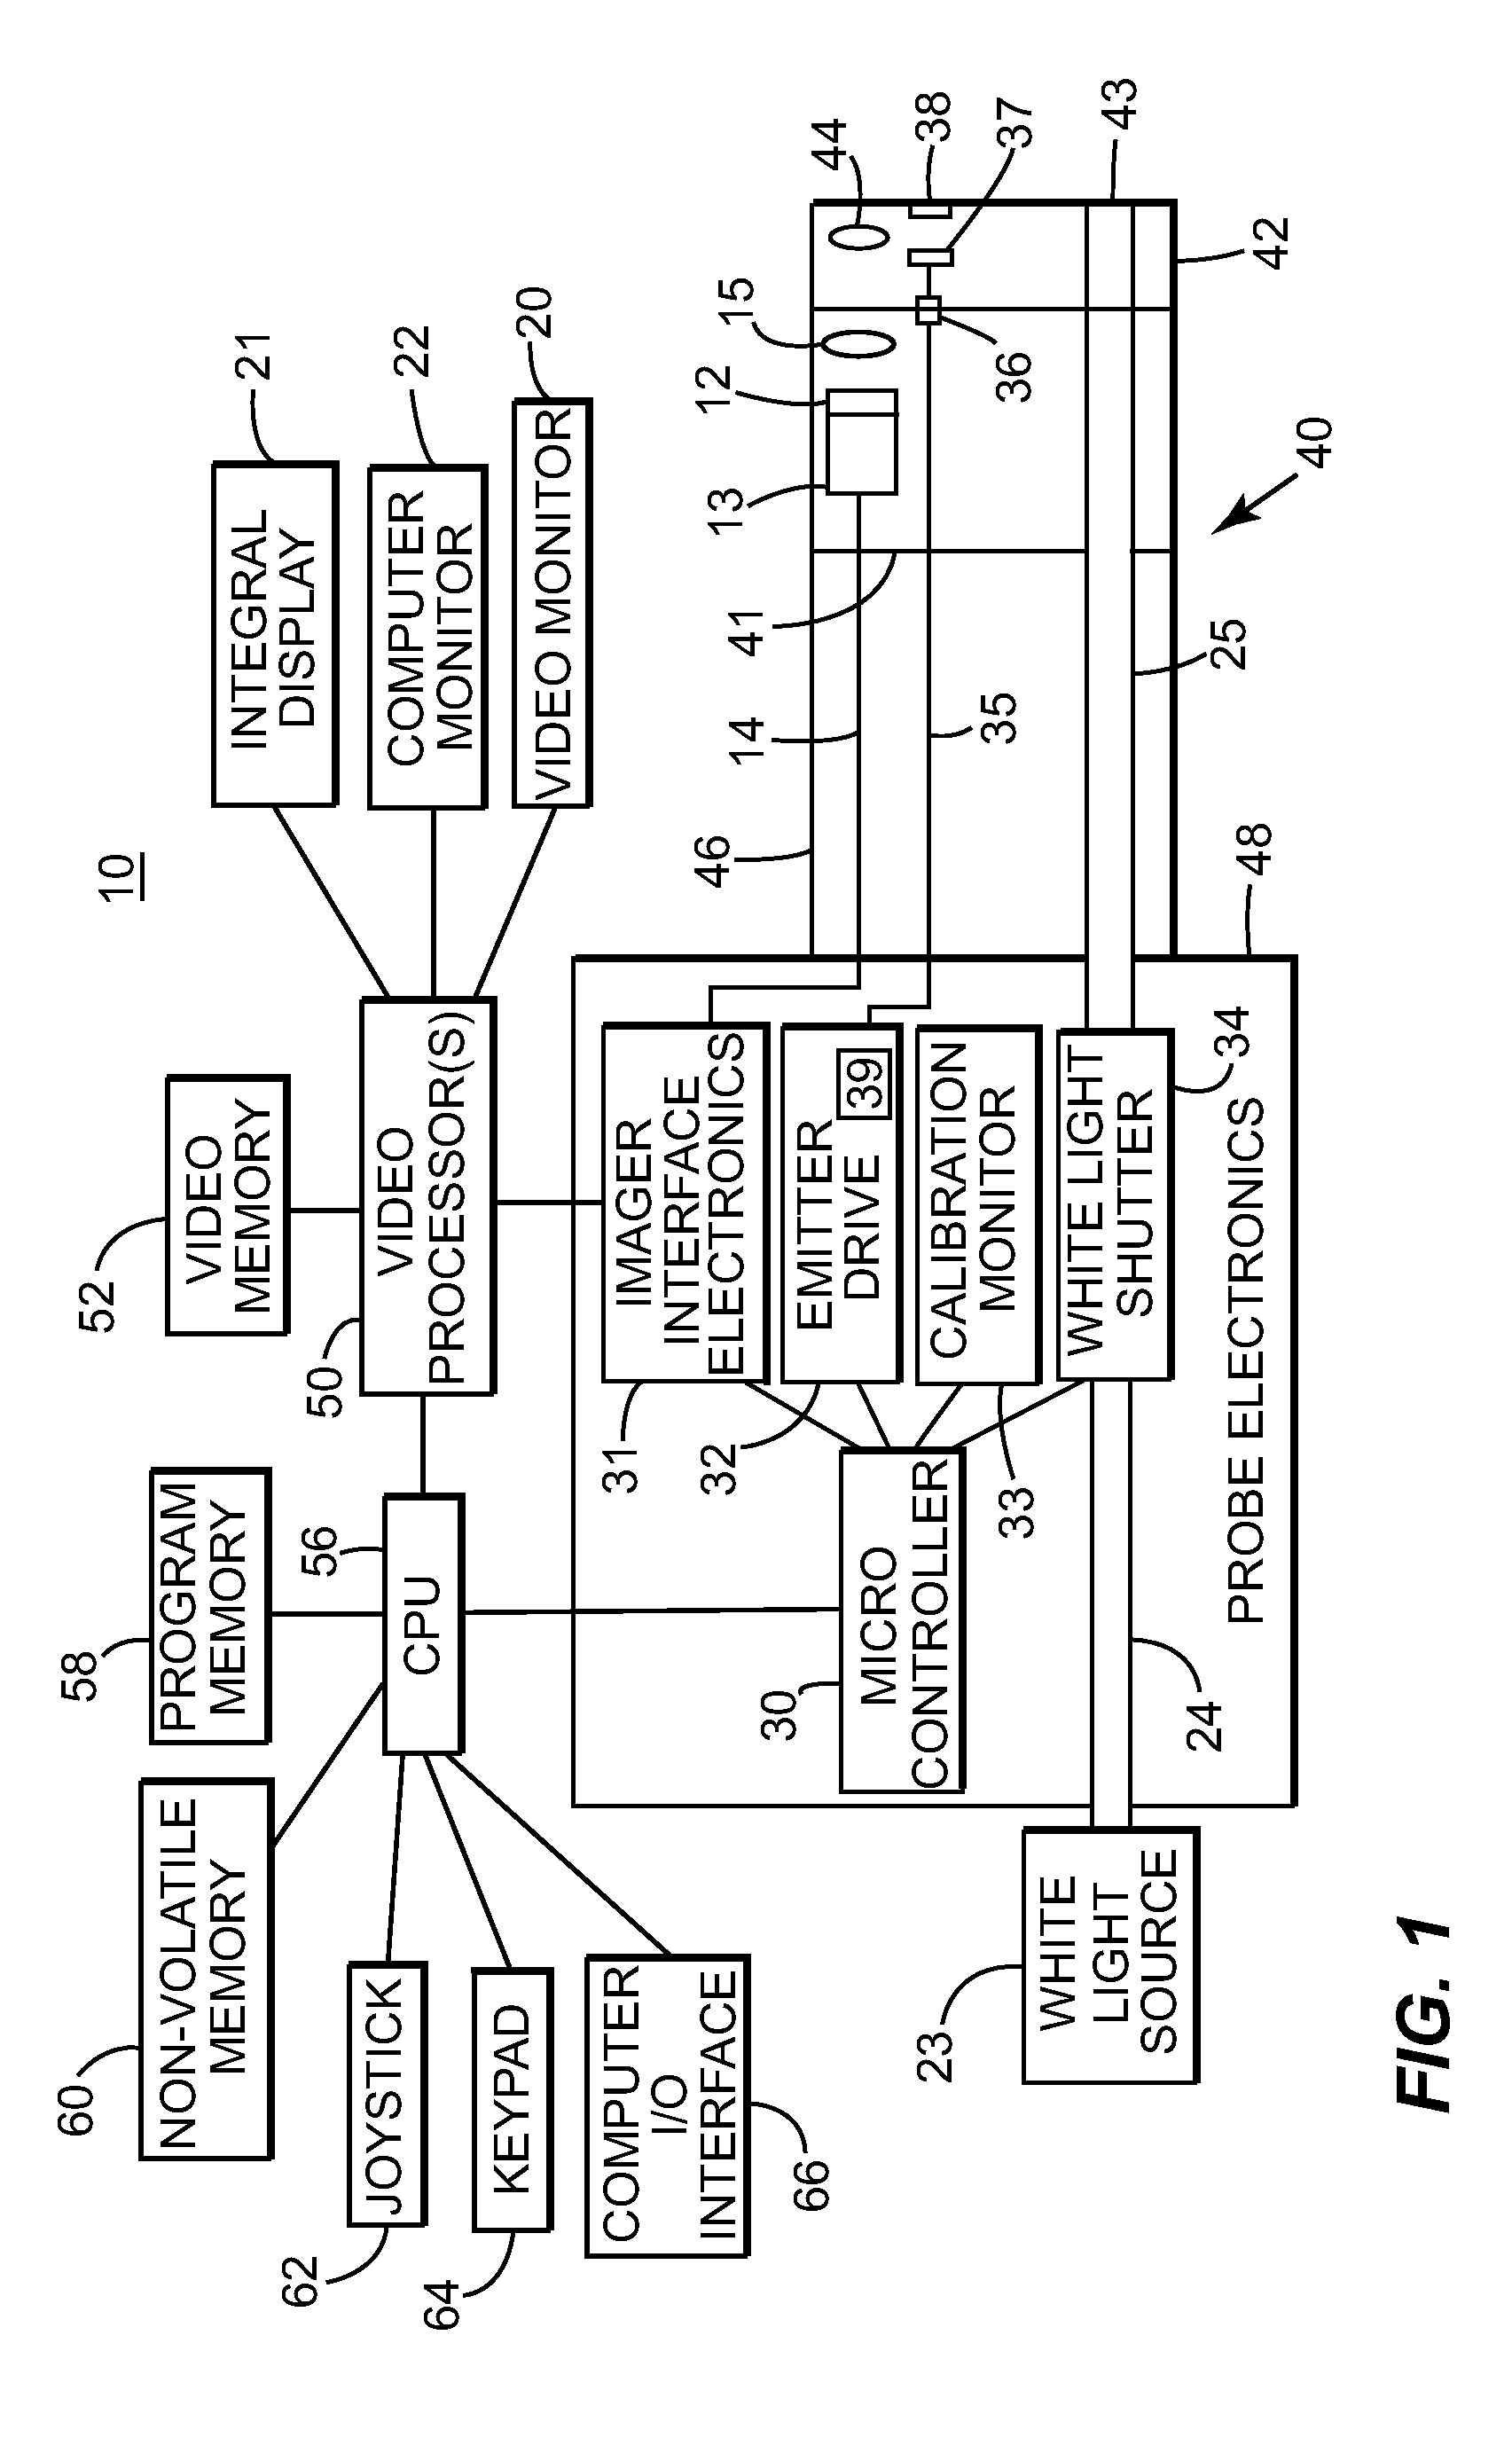 Fringe projection system and method for a probe suitable for phase-shift analysis